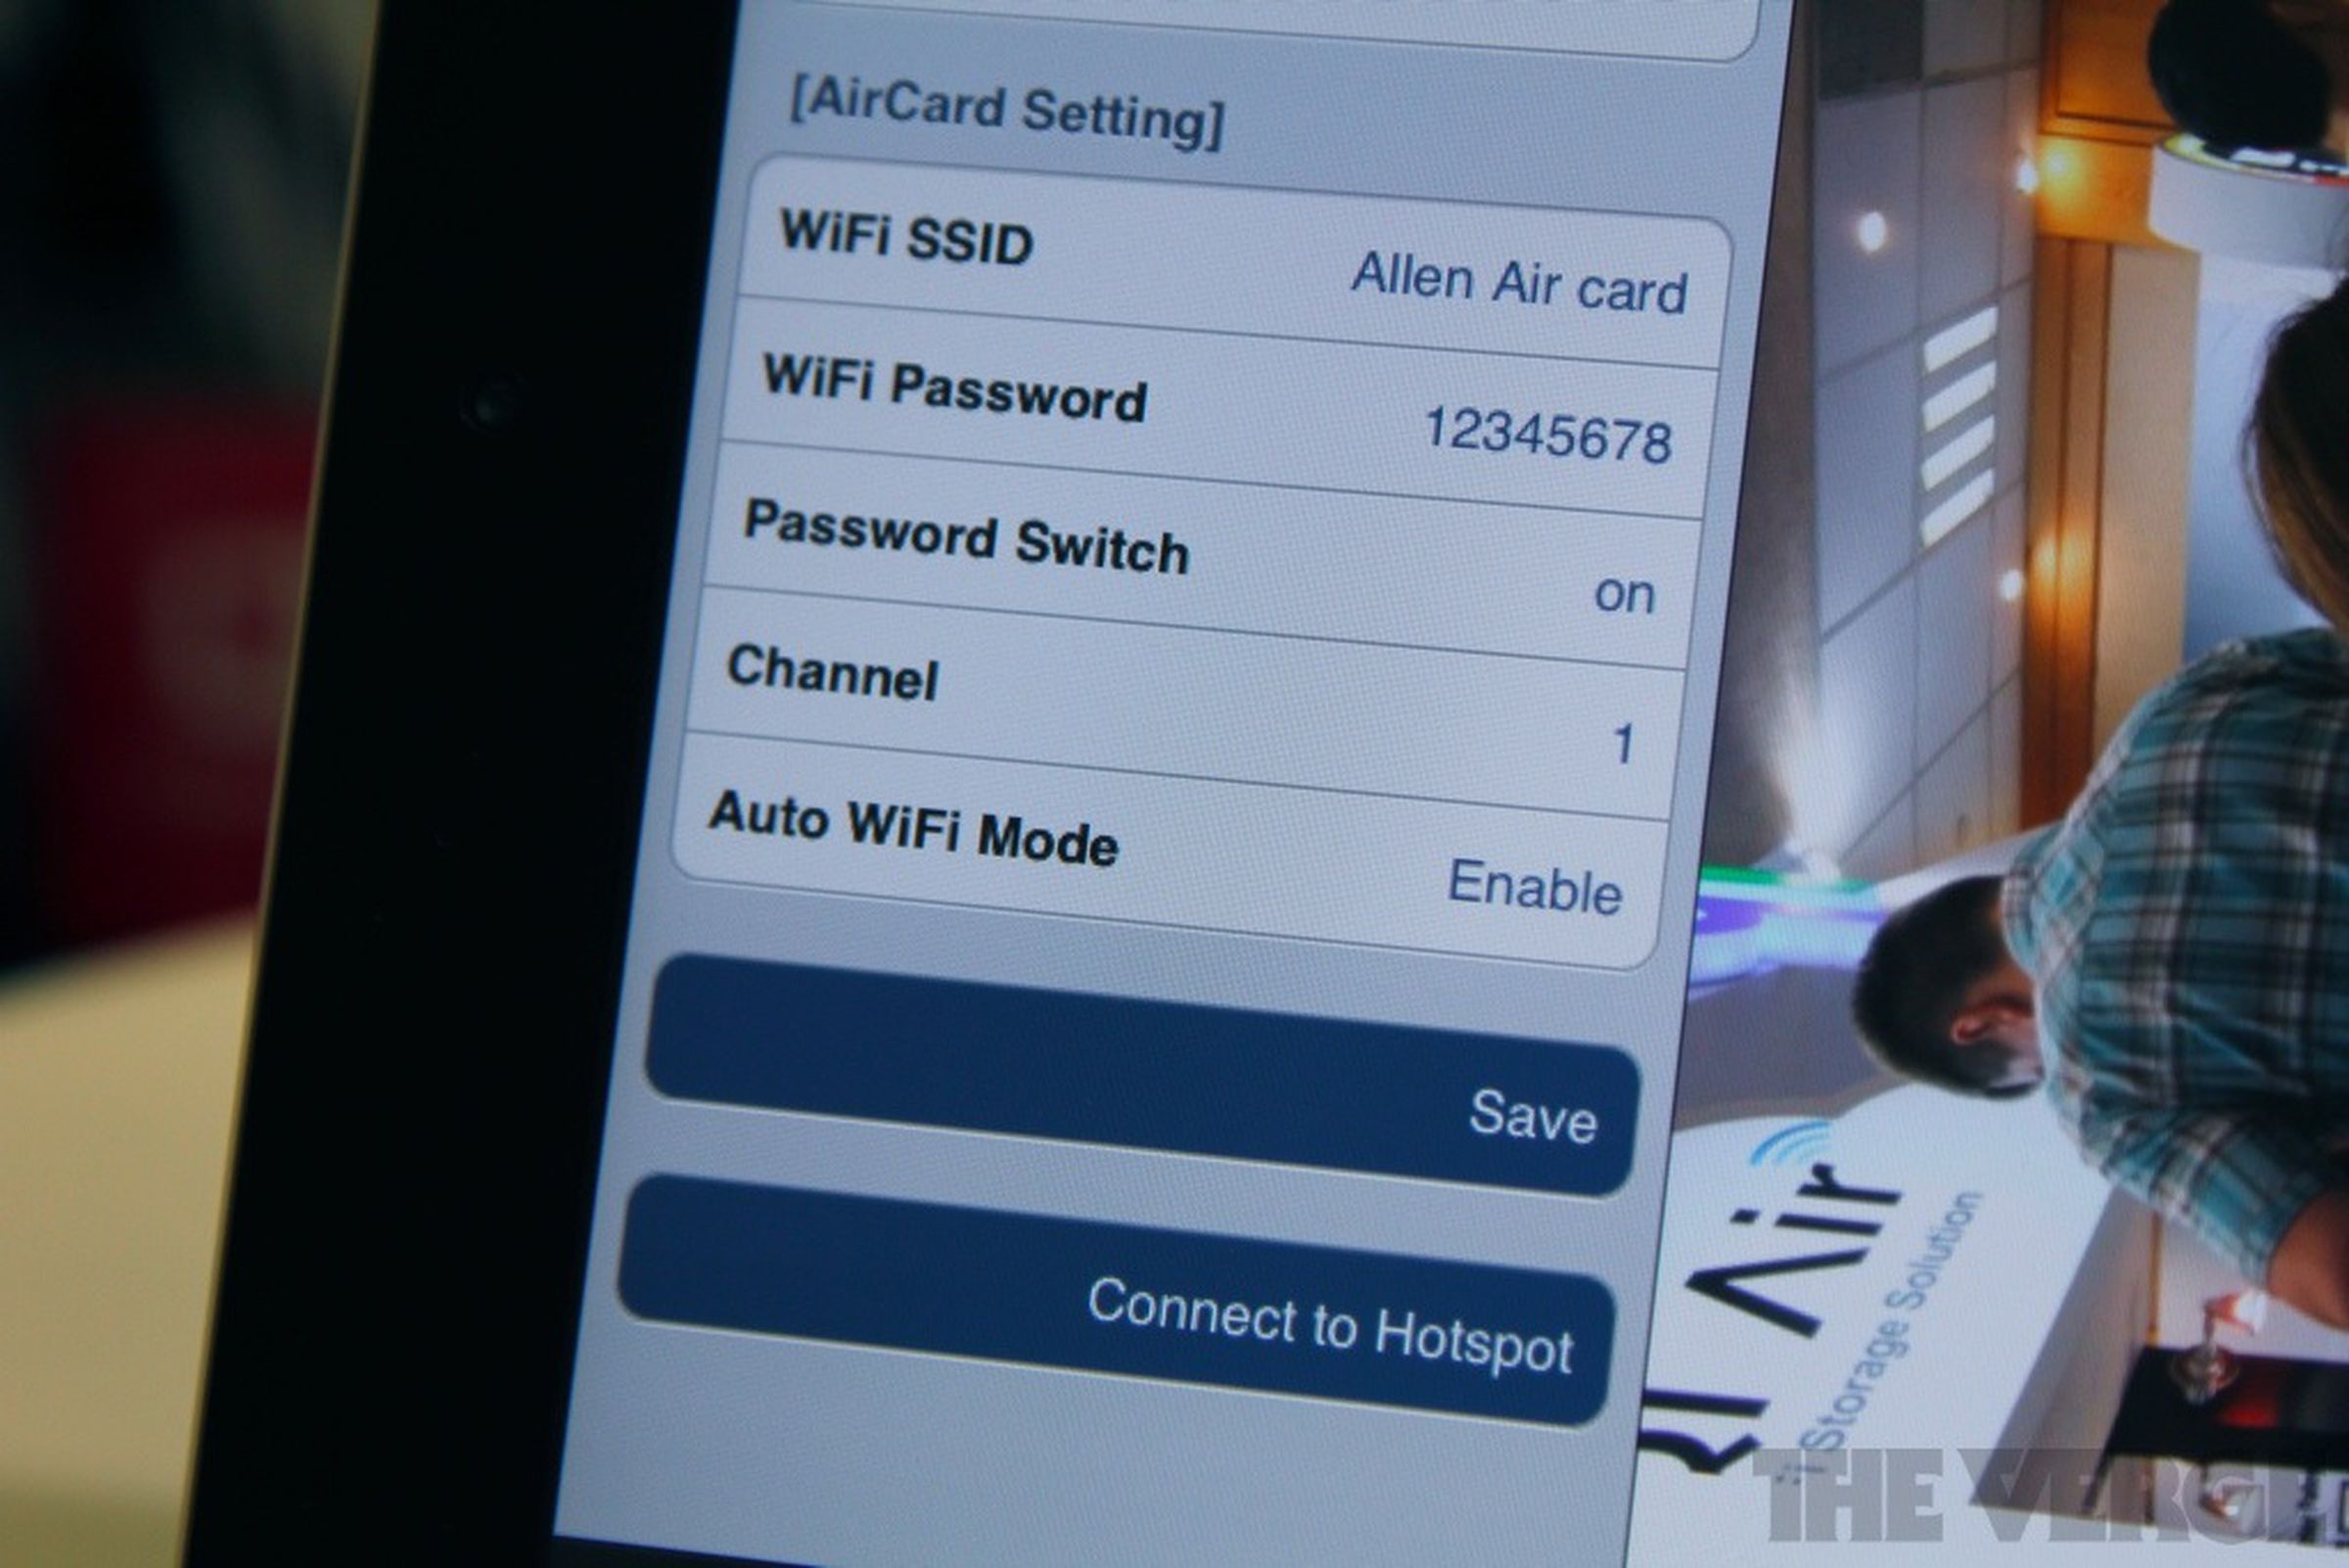 PQI Air Card Wi-Fi SD card hands-on pictures